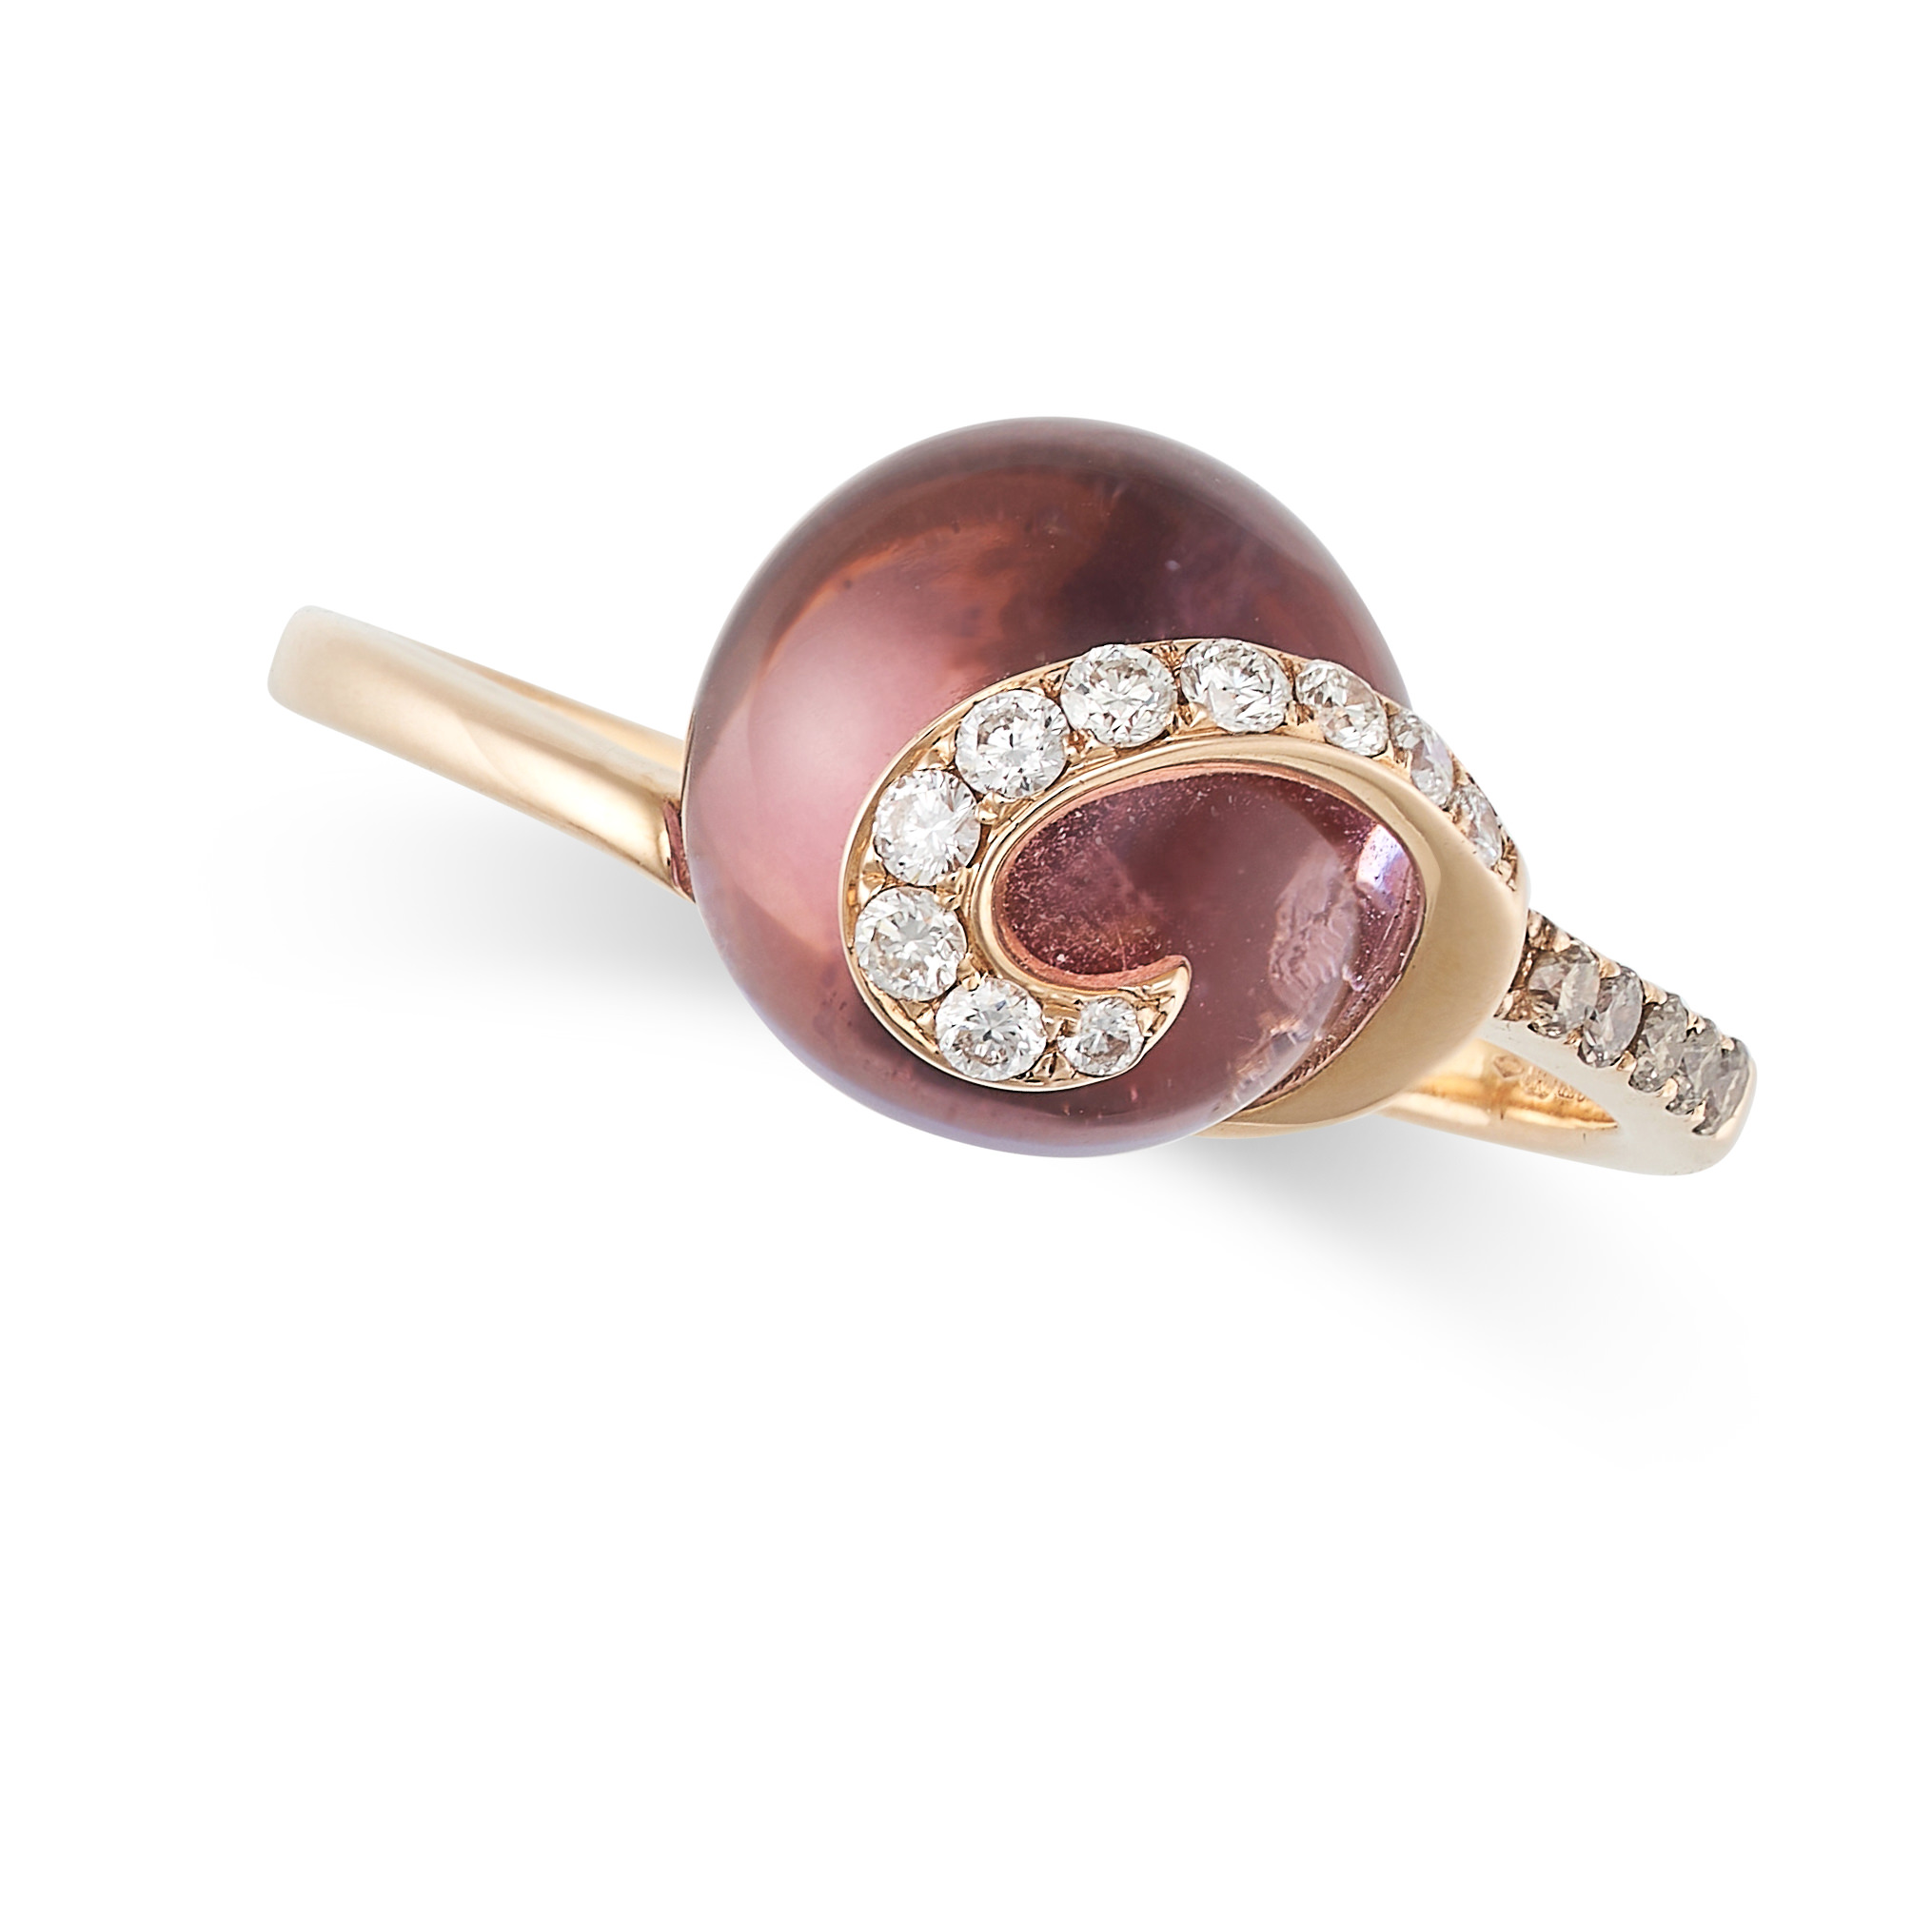 AN AMETHYST AND DIAMOND DRESS RING in 18ct rose gold, set with a cabochon cut amethyst accented b...